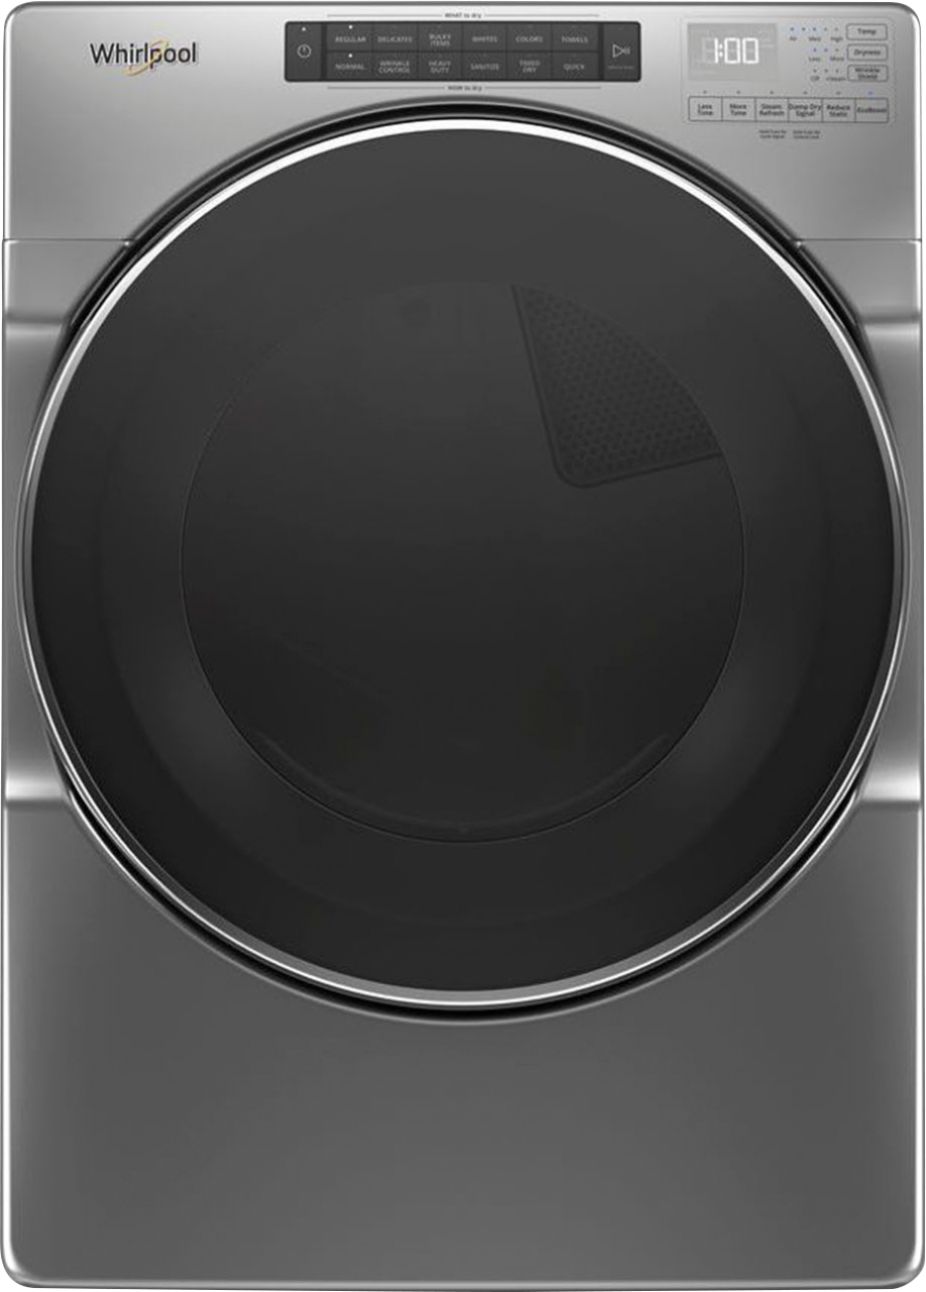 Whirlpool - 7.4 Cu. Ft. 36-Cycle High-Efficiency Gas Dryer with Steam - Chrome shadow